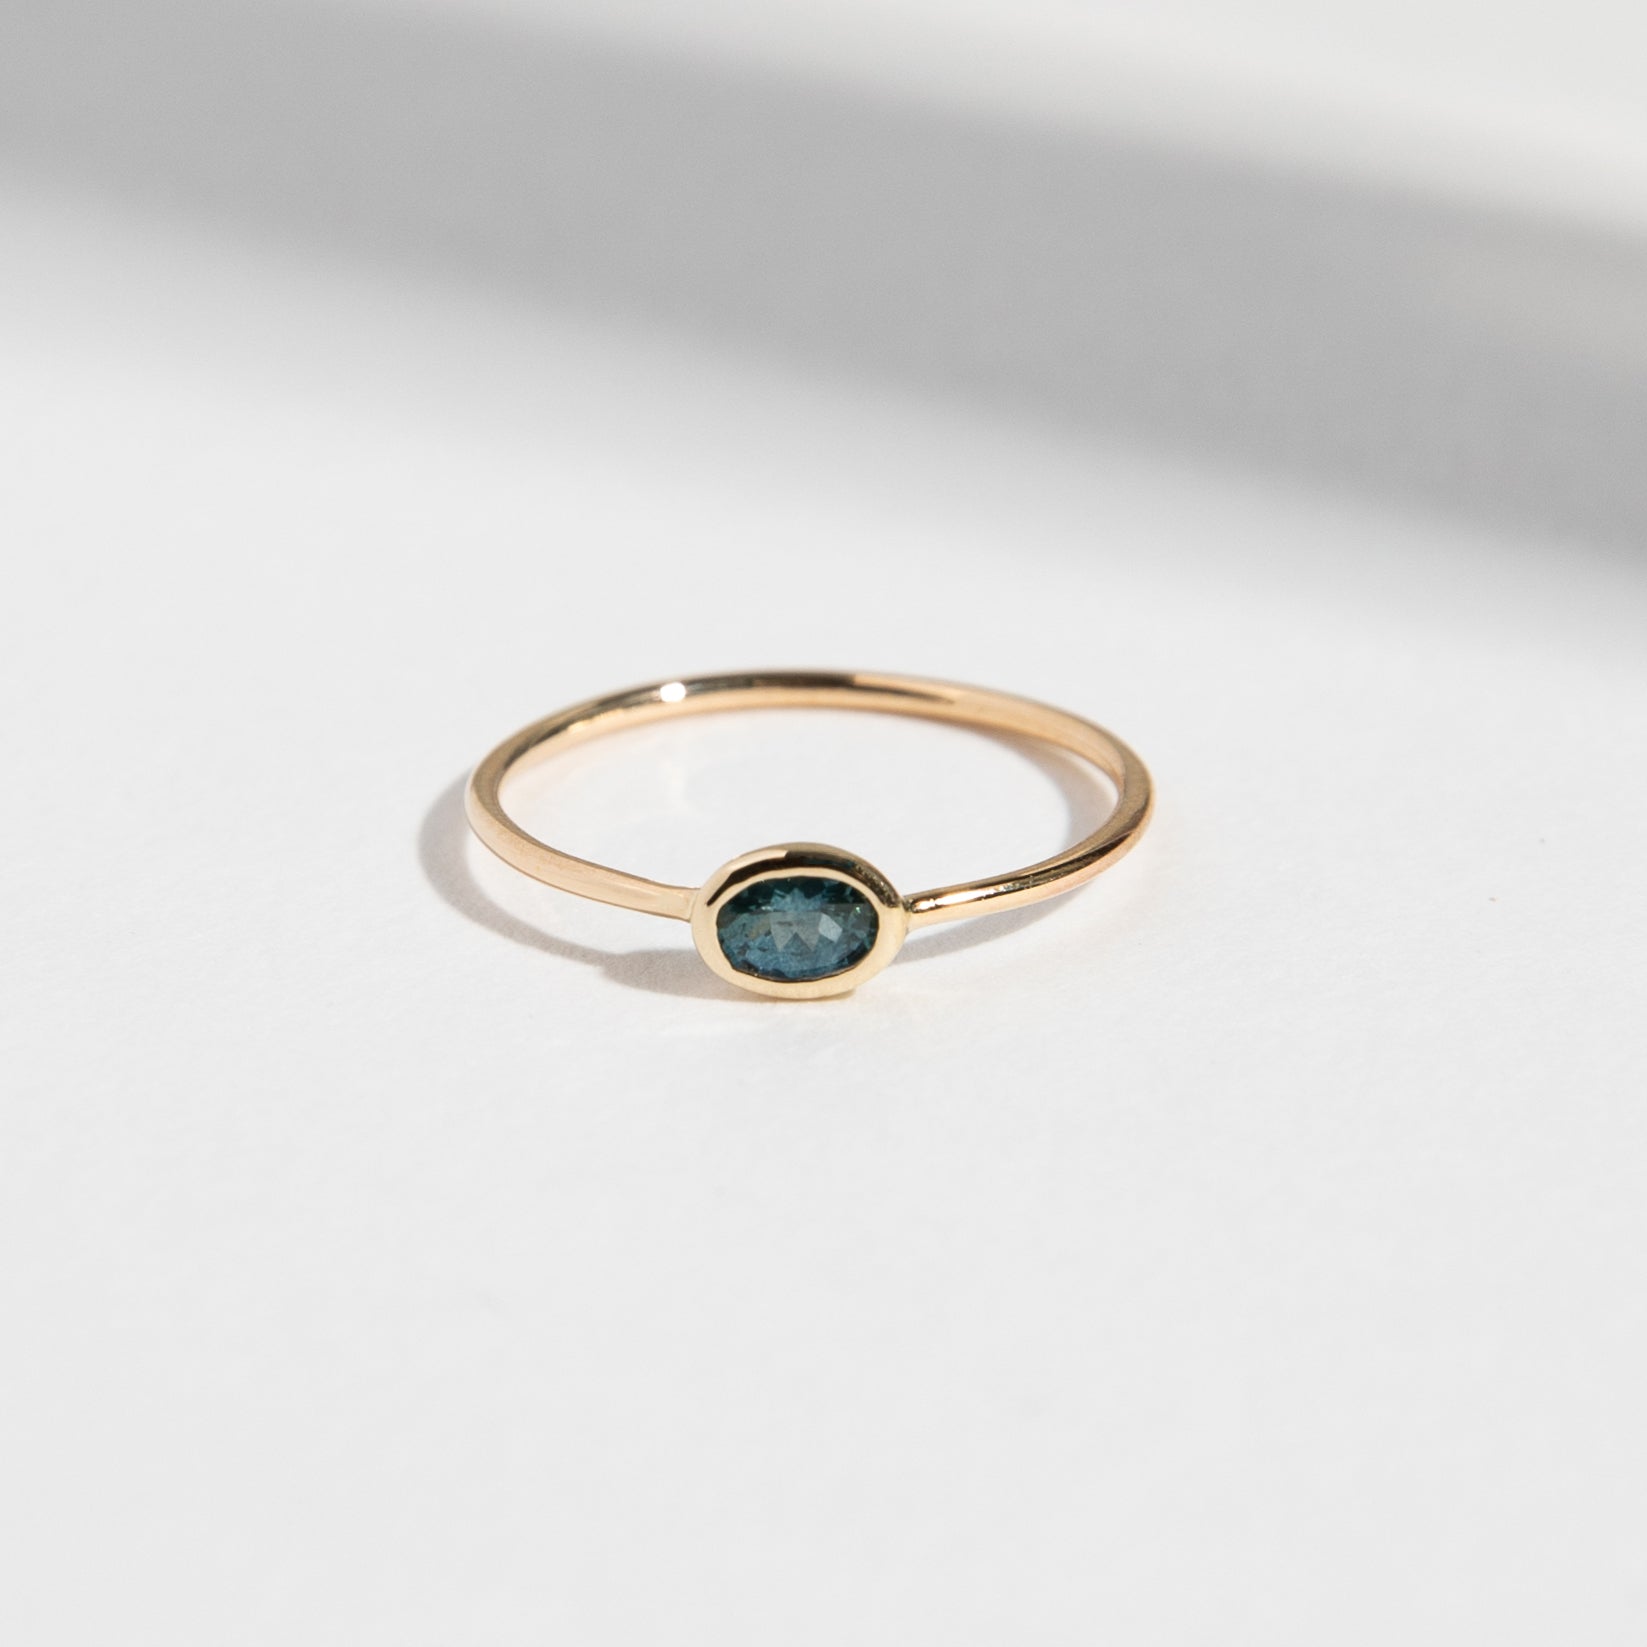 Ana Designer Ring in 14k Gold set with a 0.3ct blue sapphire by SHW Fine Jewelry